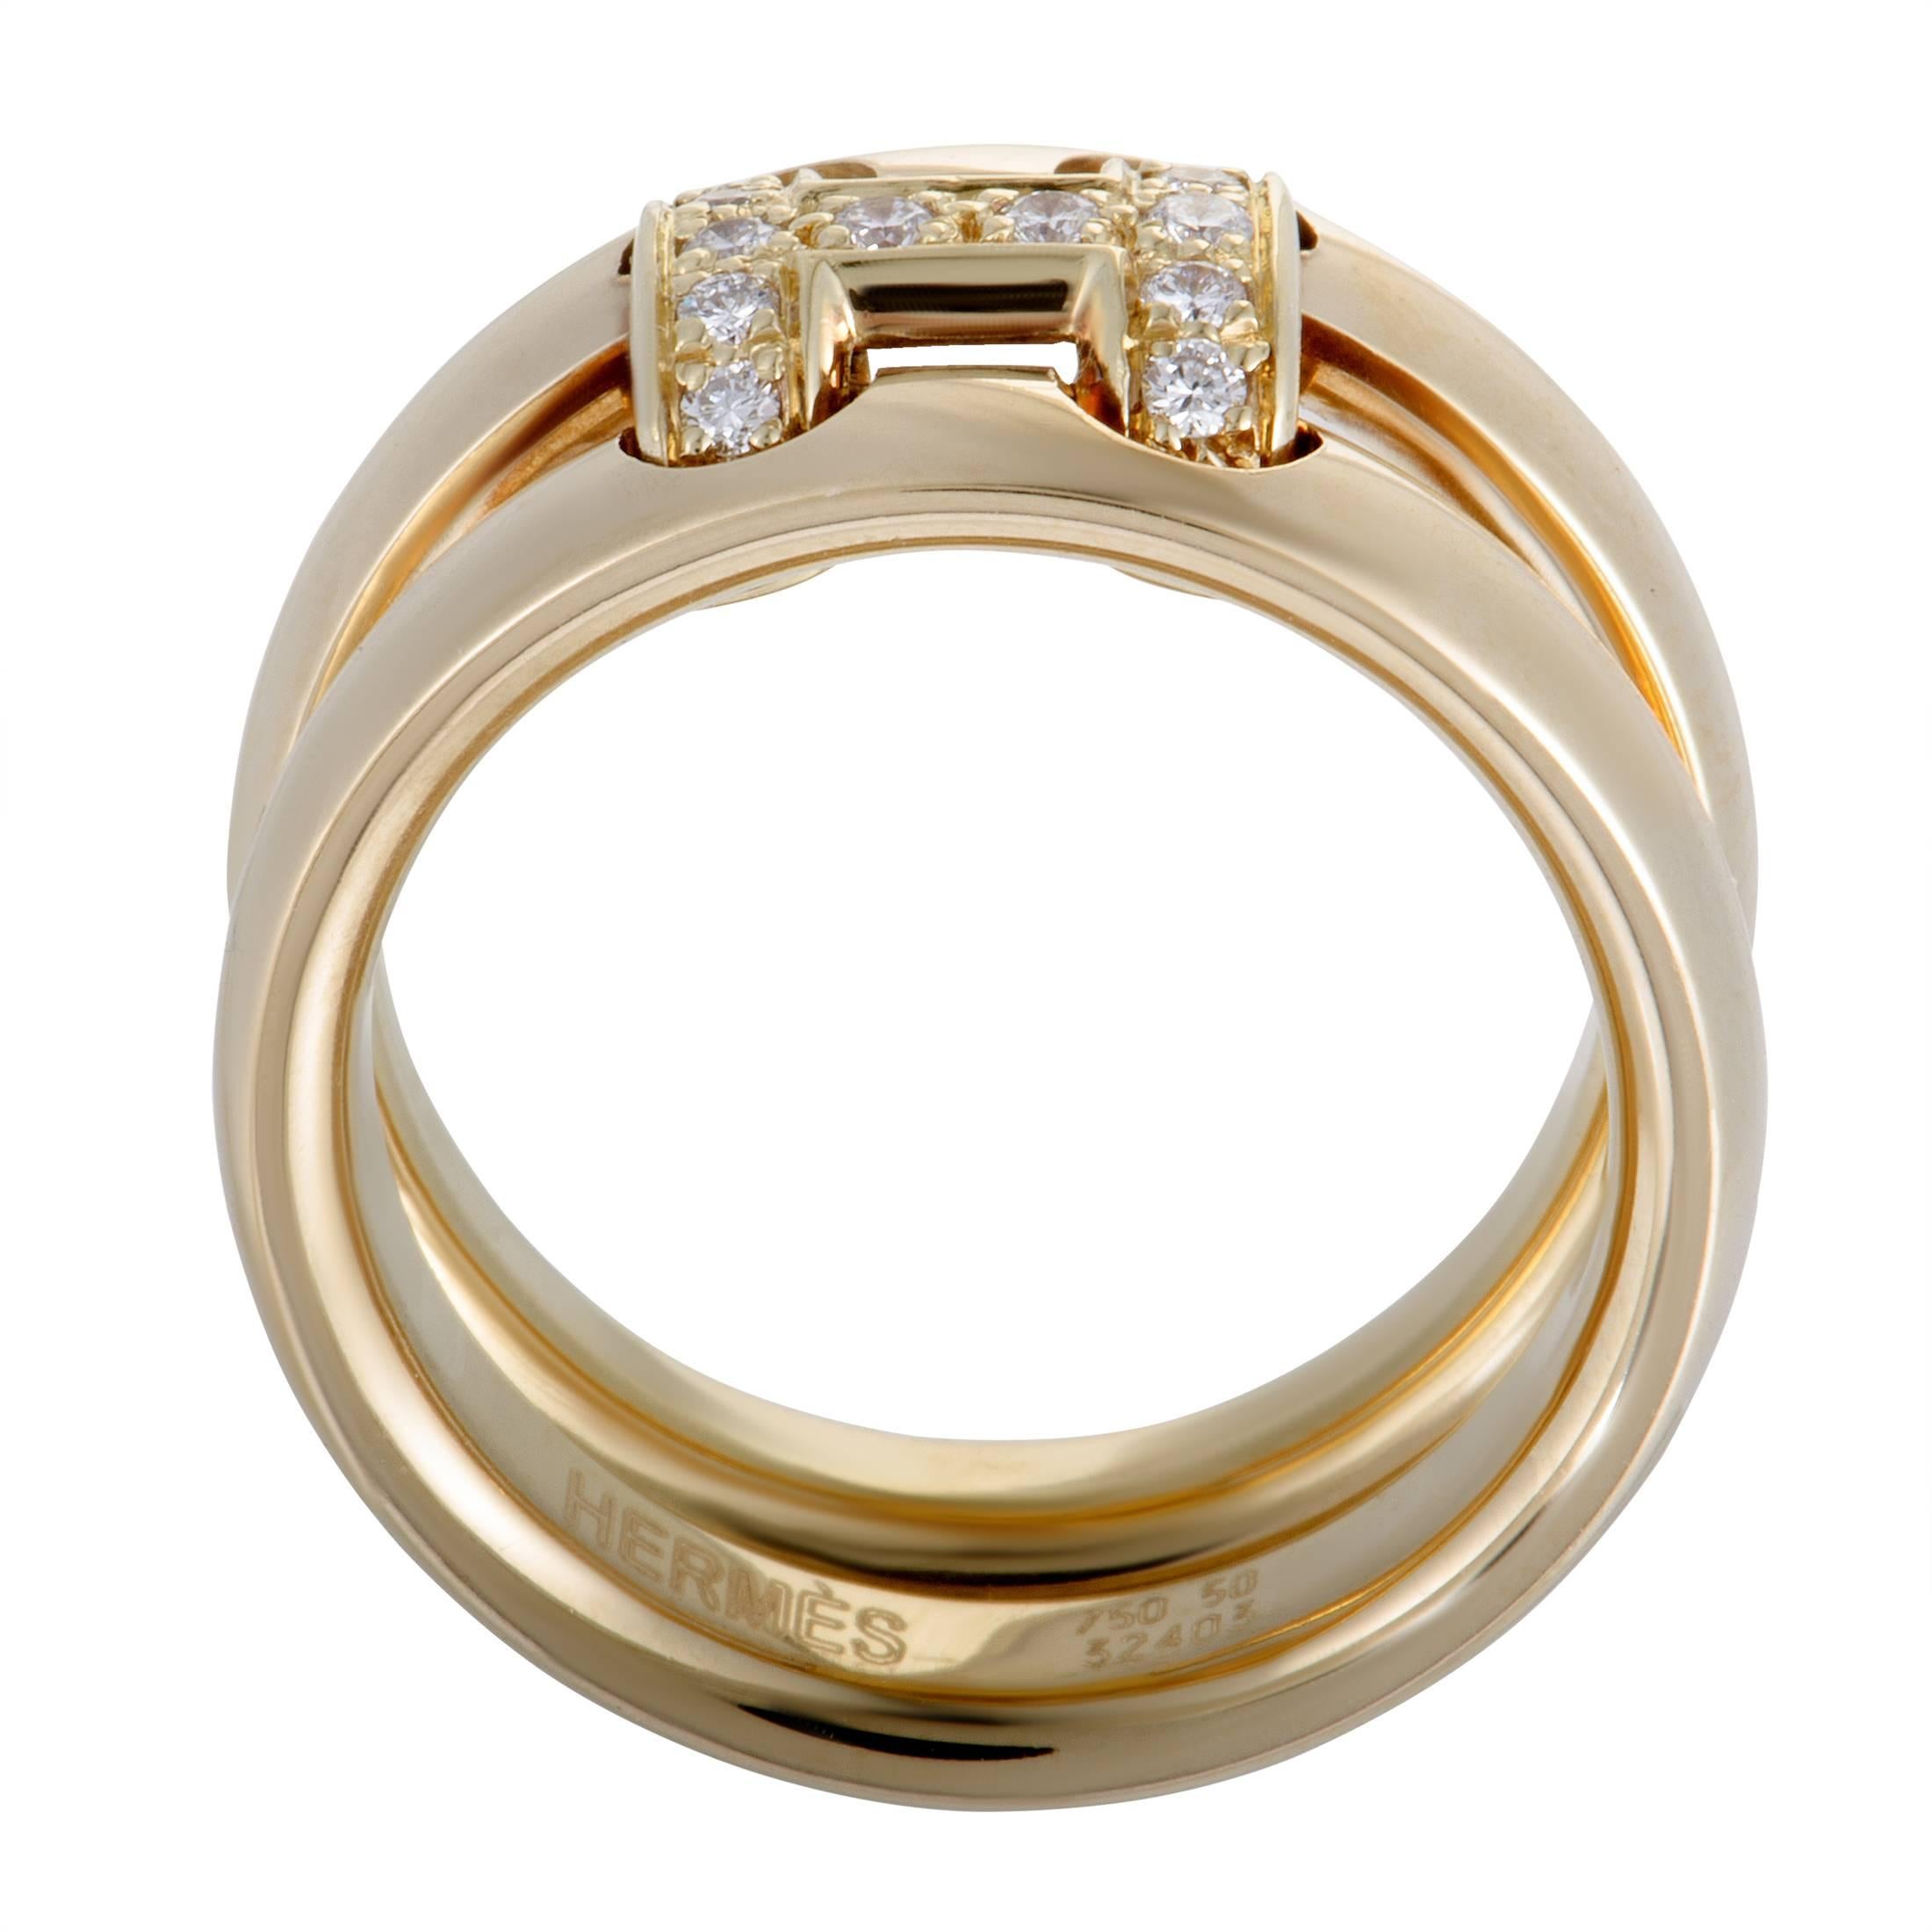 Graced with the iconic “H” that immediately sets apart the highly revered Hermès pieces, this stunning ring offers an exceptionally refined appearance. The ring is made of 18K yellow gold and niftily embellished with scintillating diamond